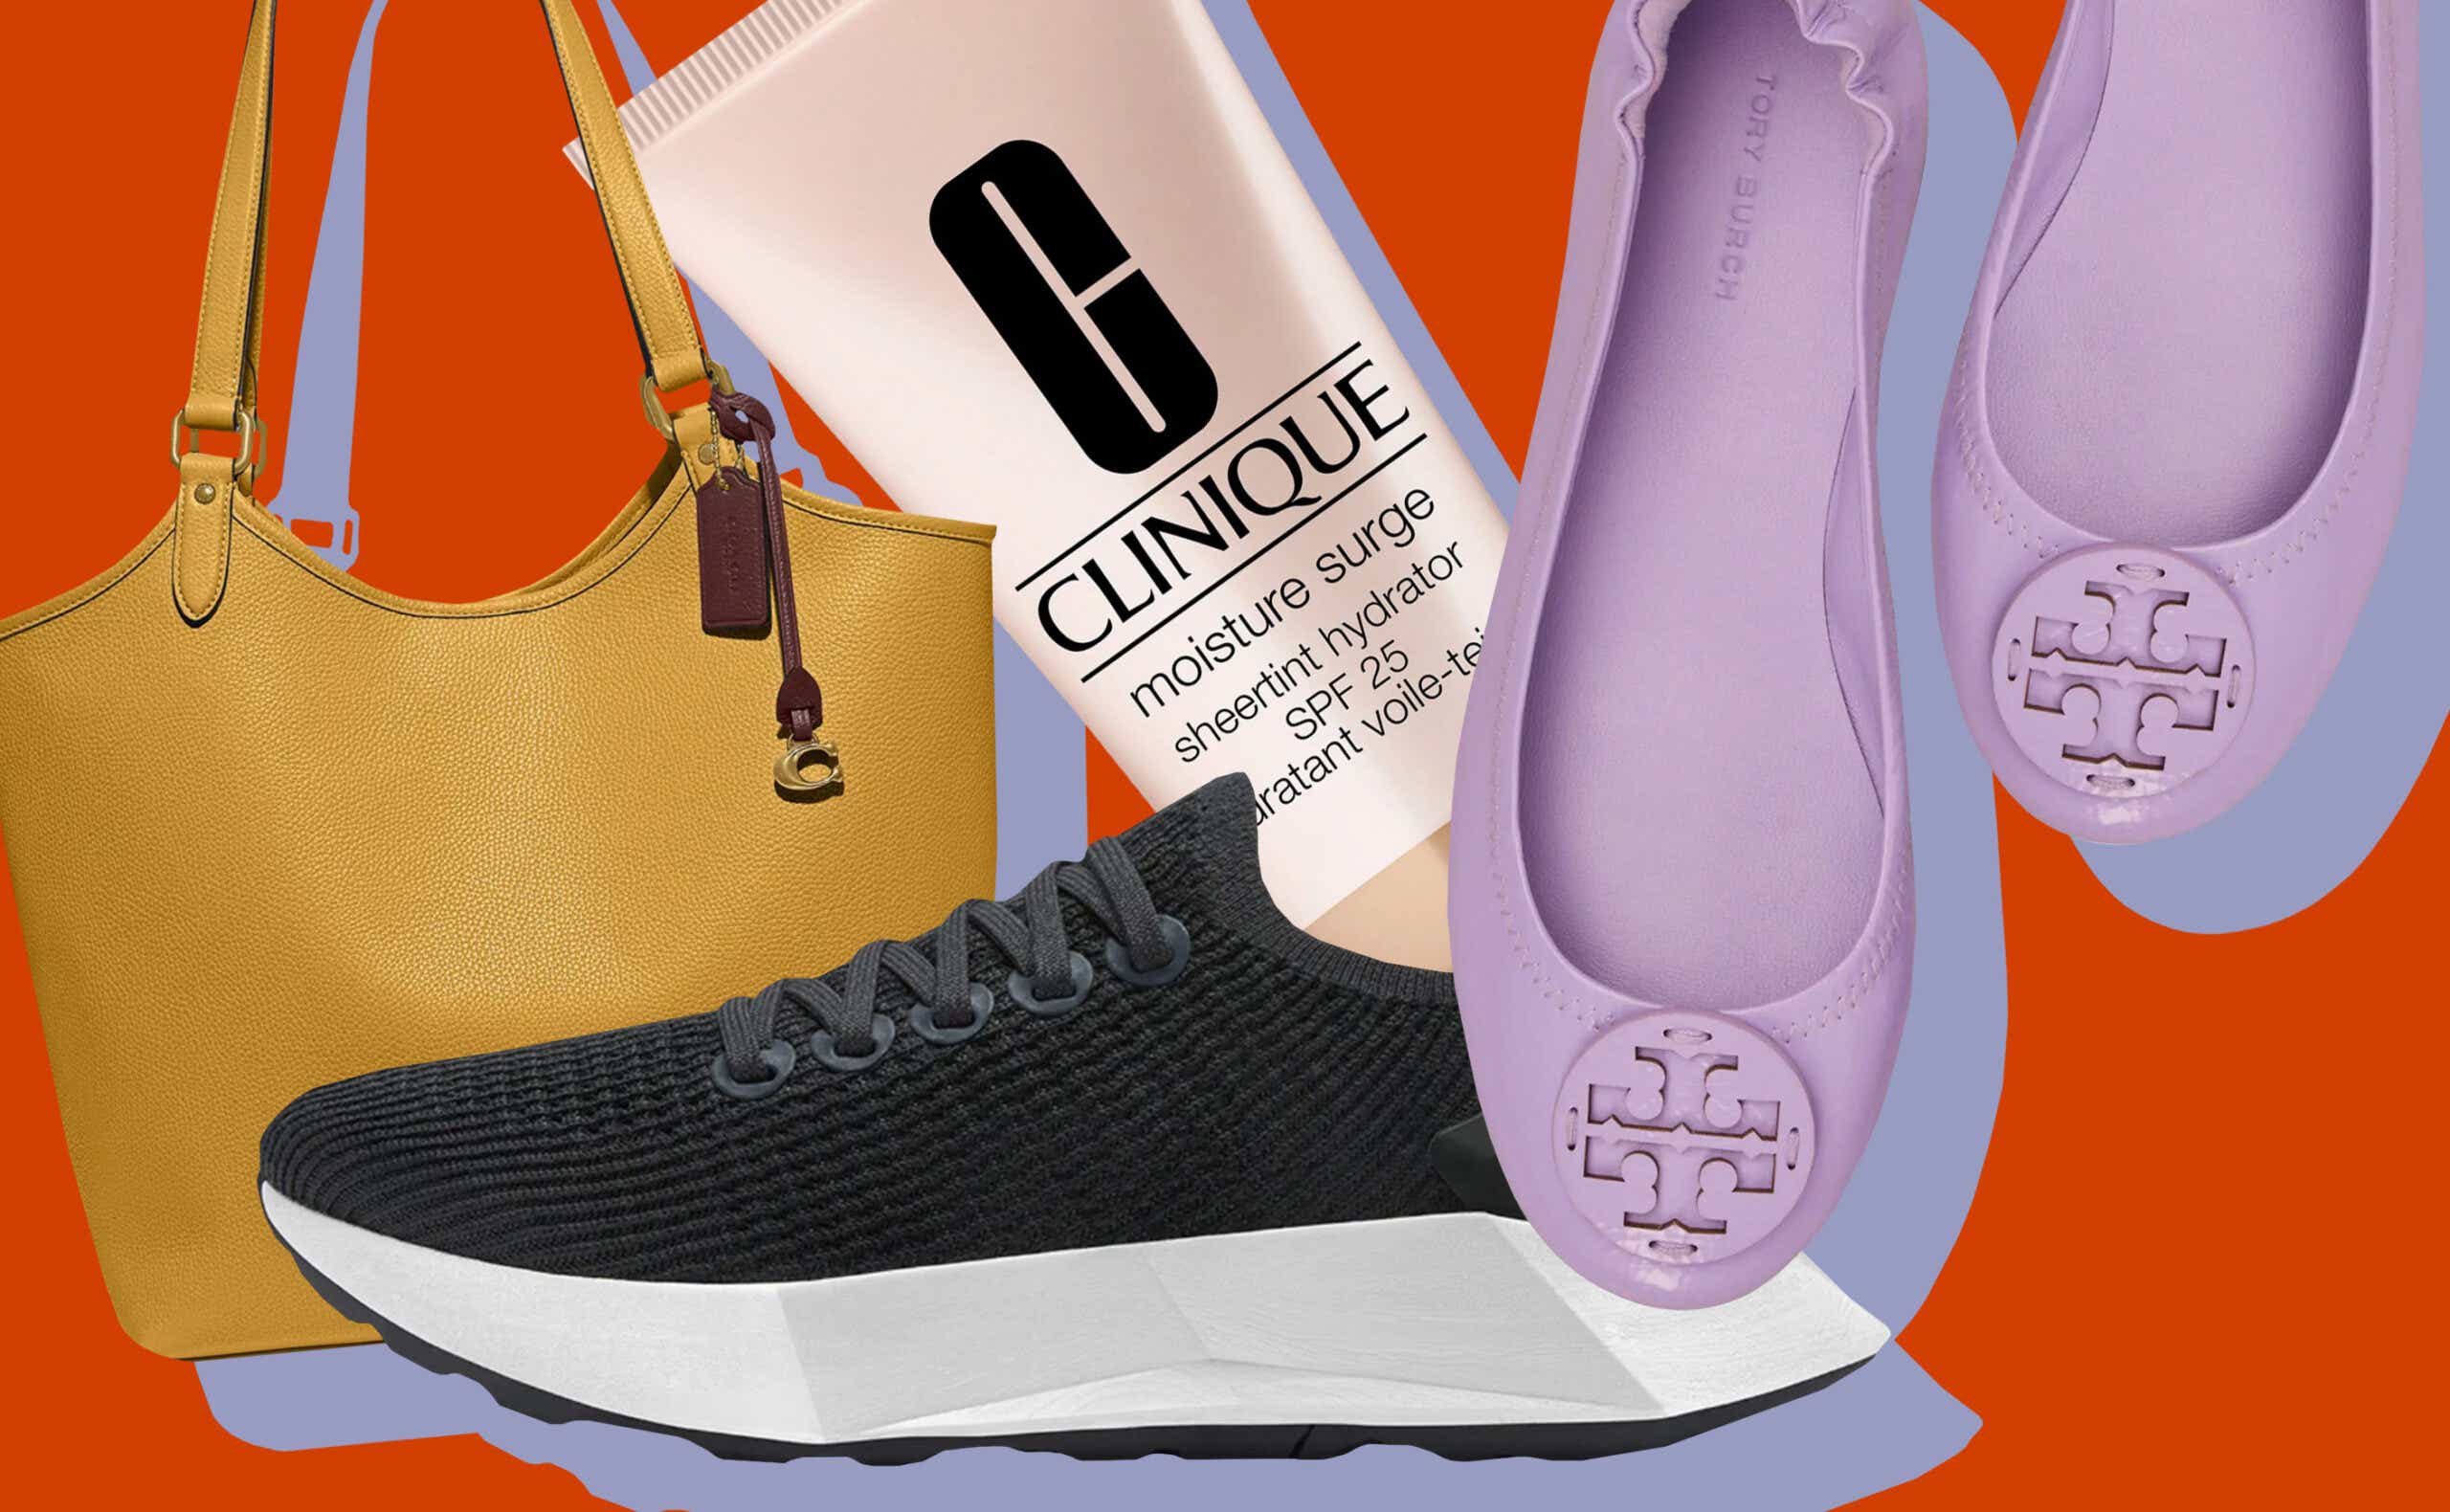 purple flats, black sneaker, yellow bag, clinique on background